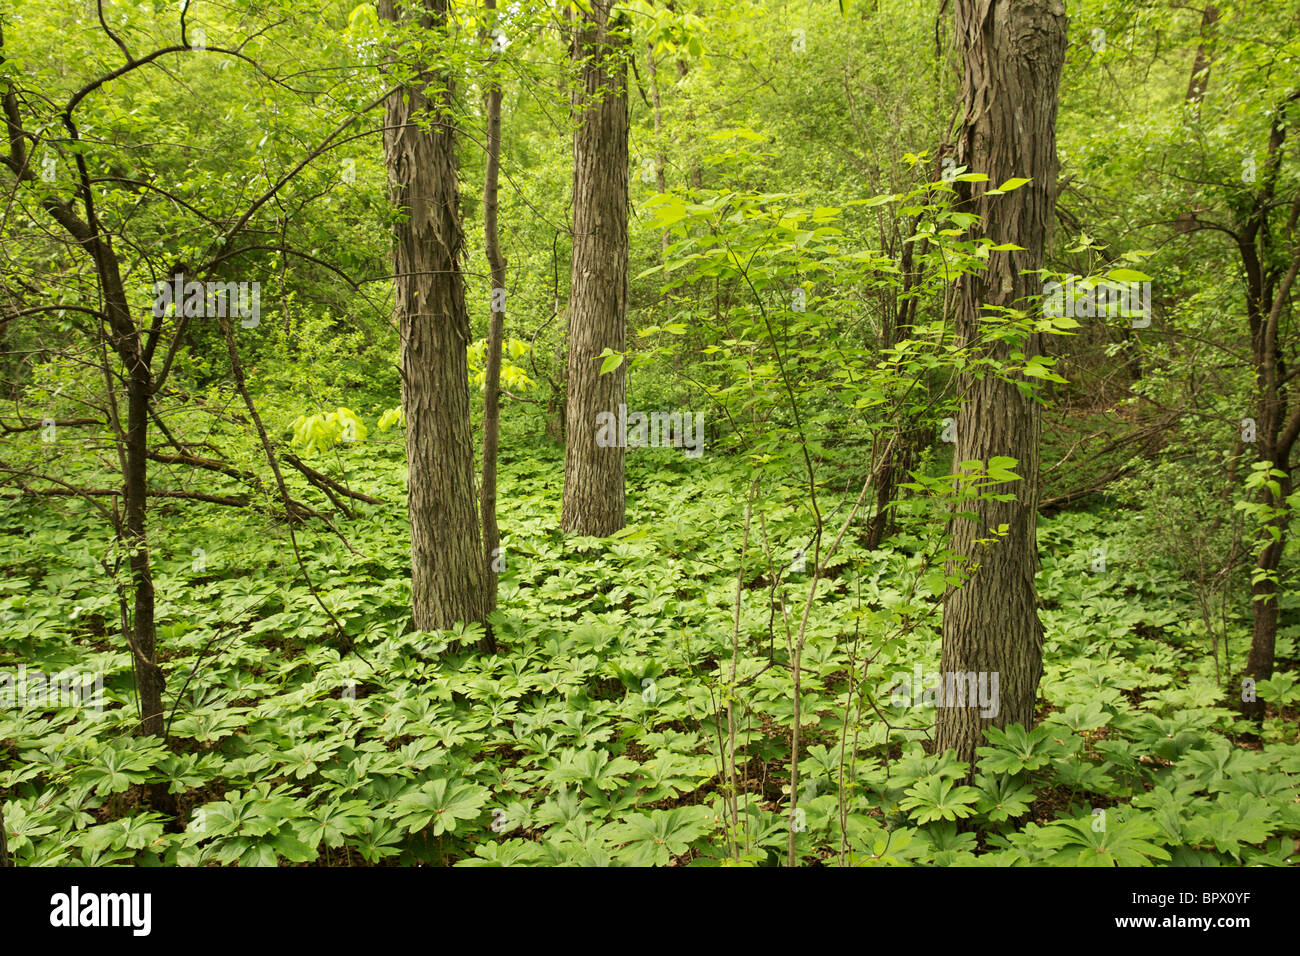 Hickory forest with May apples covering forest floor in spring. Moraine Hills State Park, Illinois Stock Photo